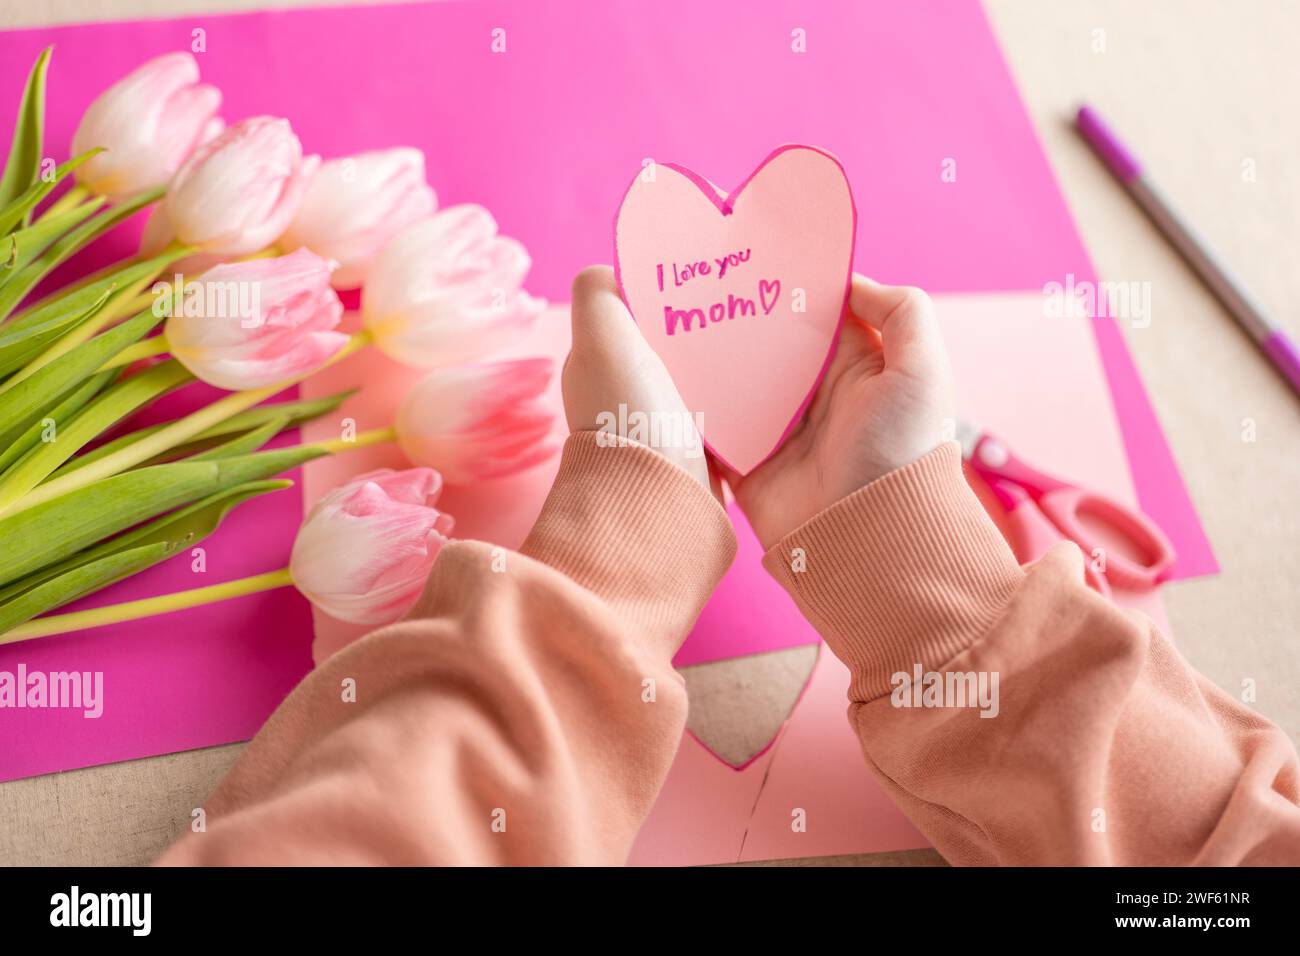 I love you, Mom. Childrens hands holding a heart card.Pink heart card and pink tulips.child makes a card for his mother.Flowers and cards for mom.moms Stock Photo